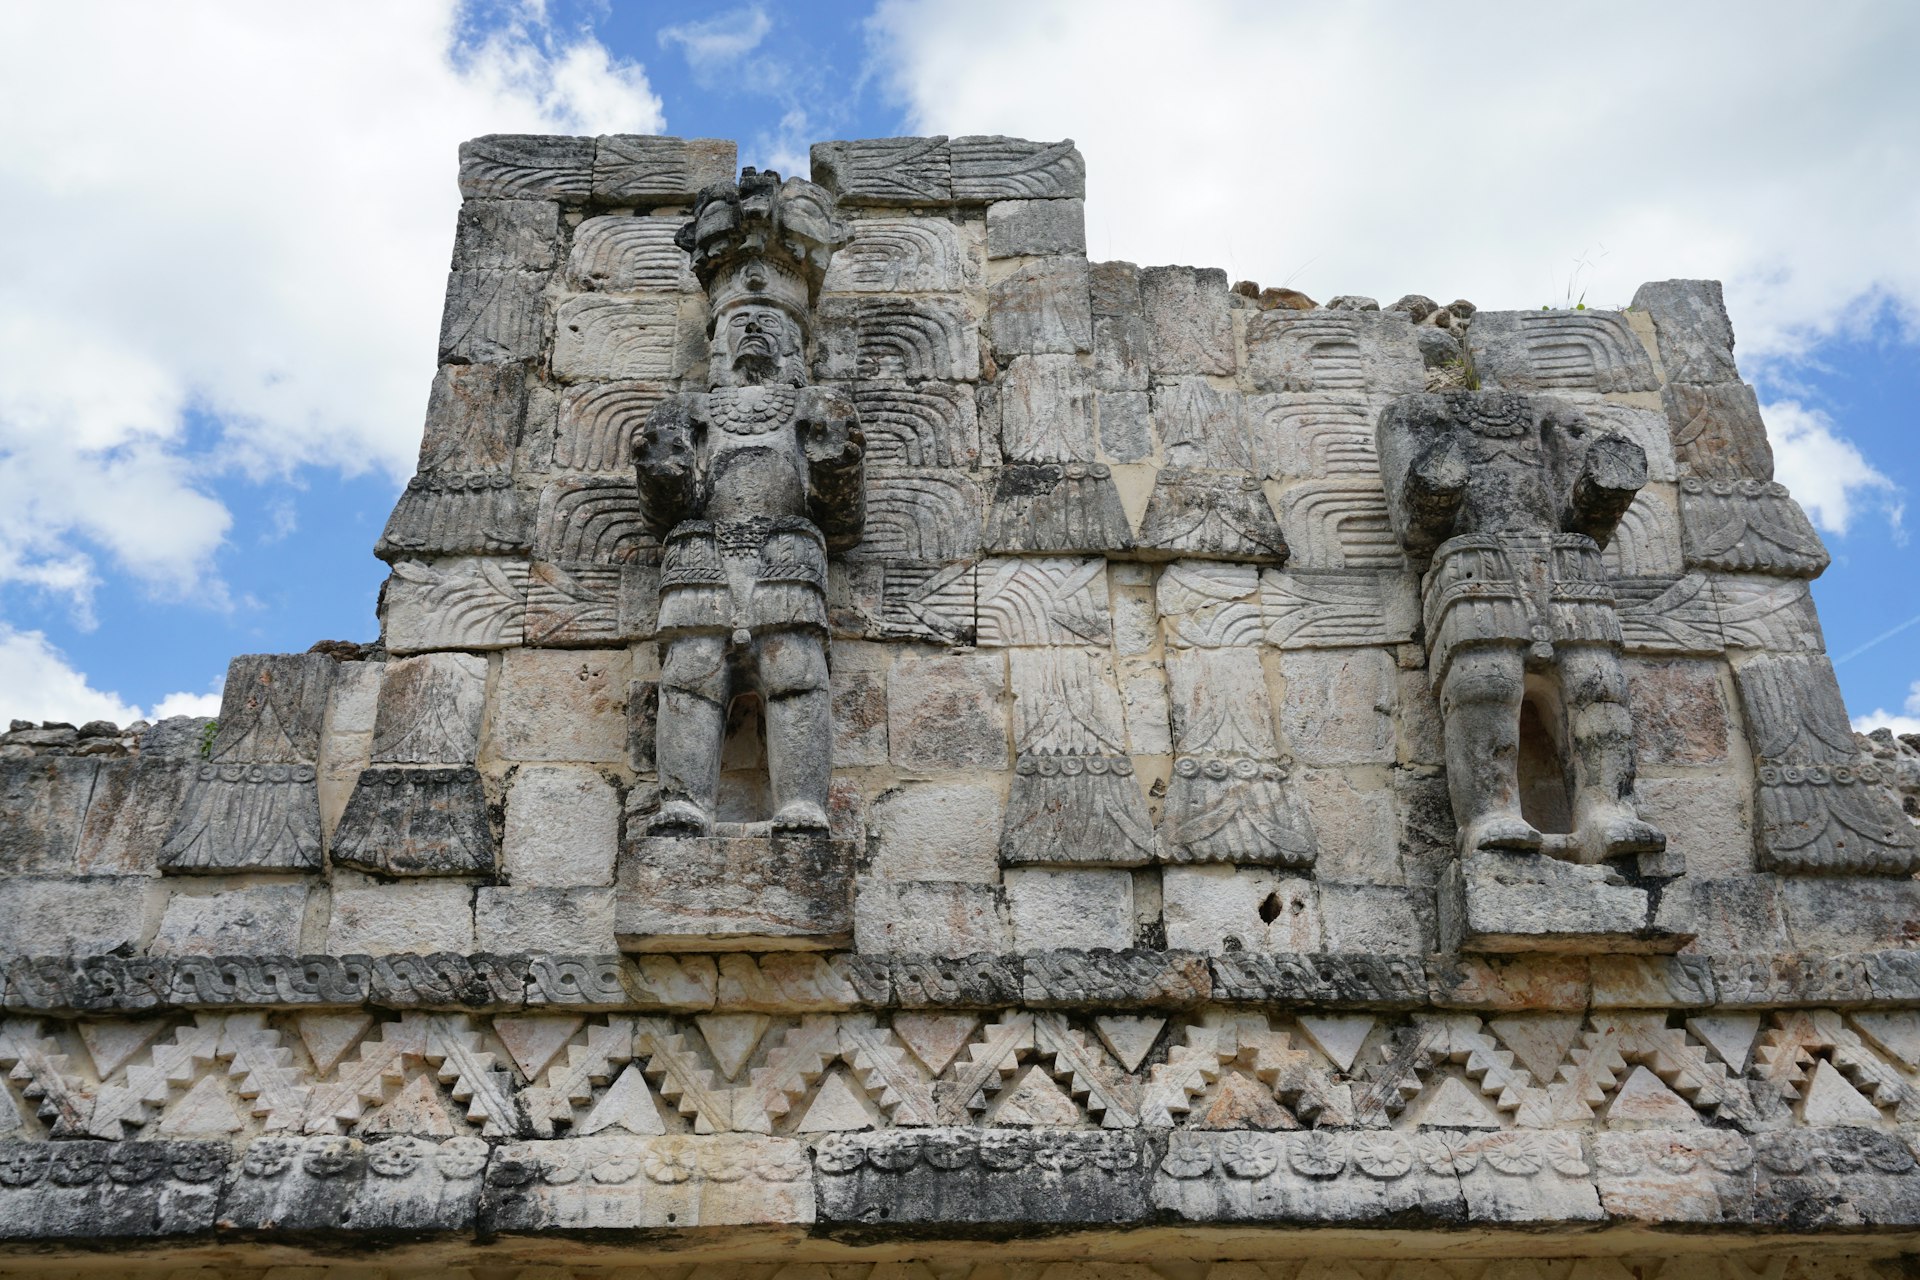 Stone reliefs of Mayan gods on the side of a pyramid